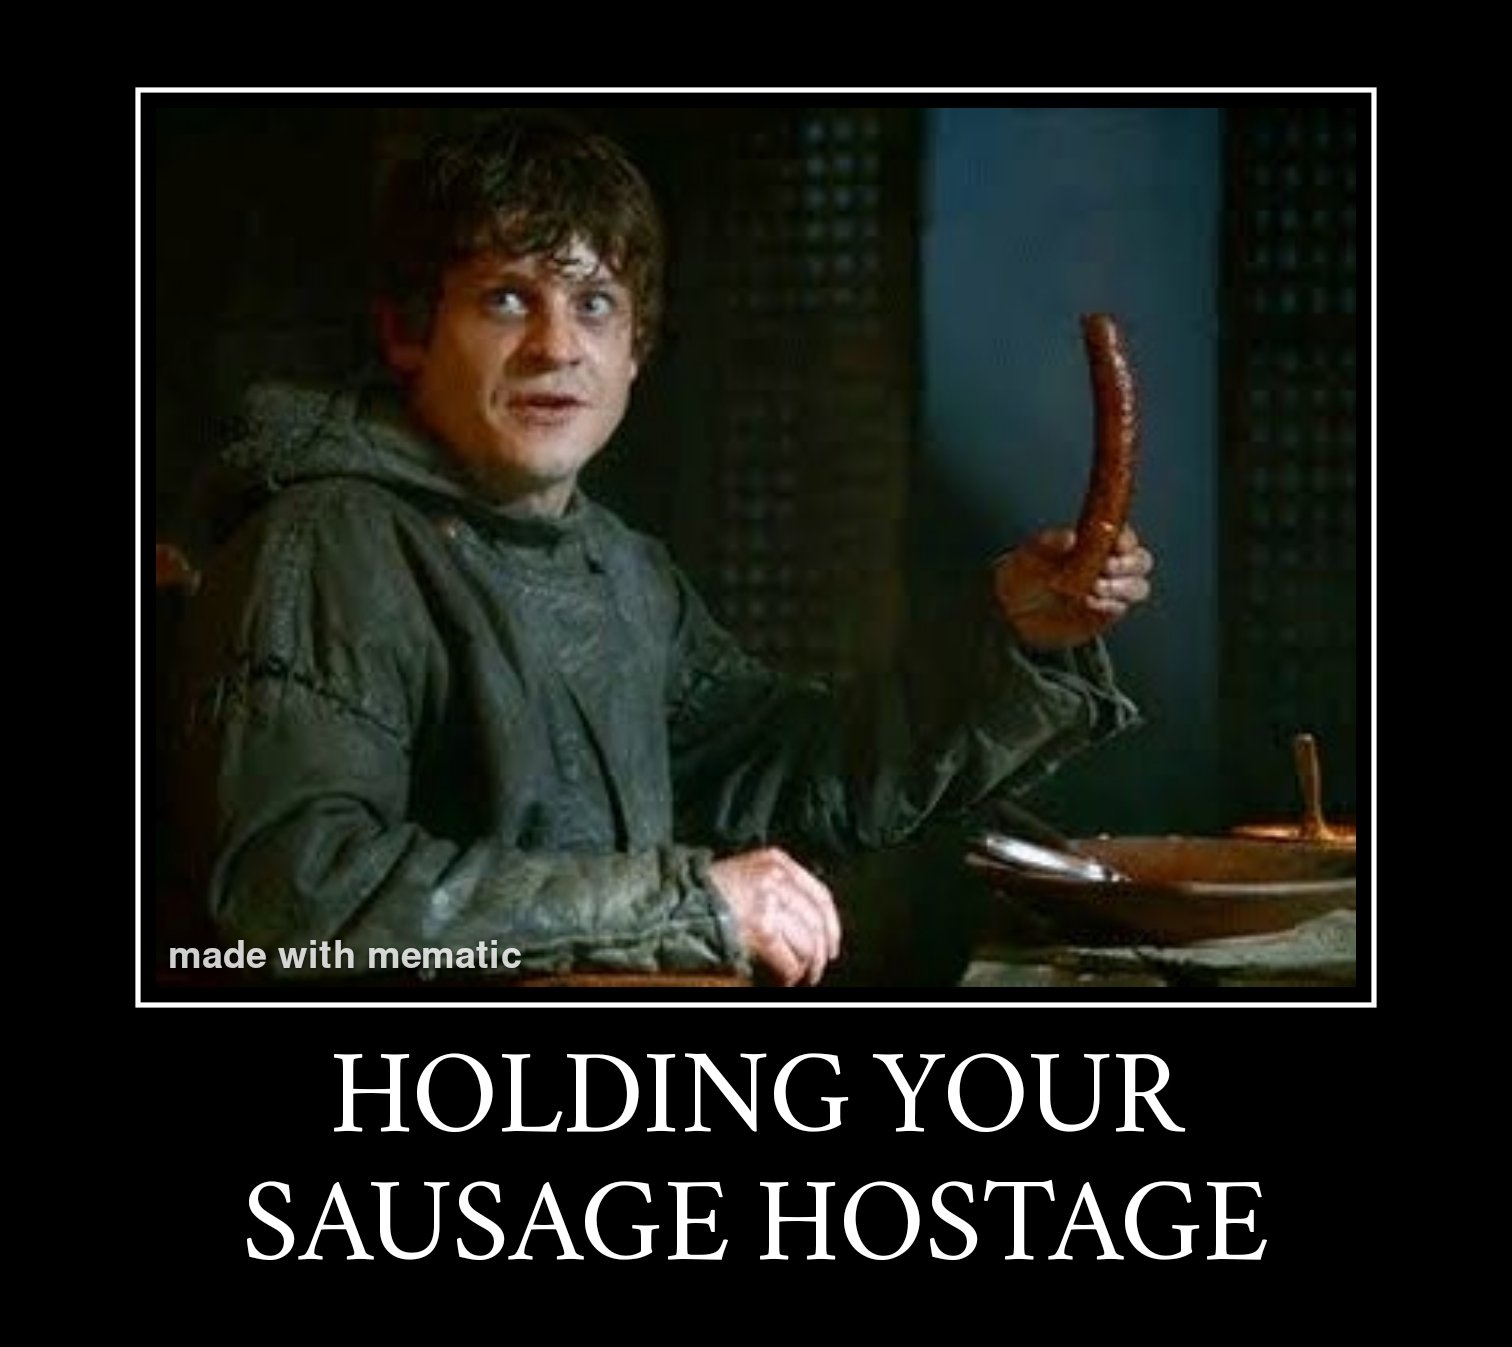 Holding the sausage hostage